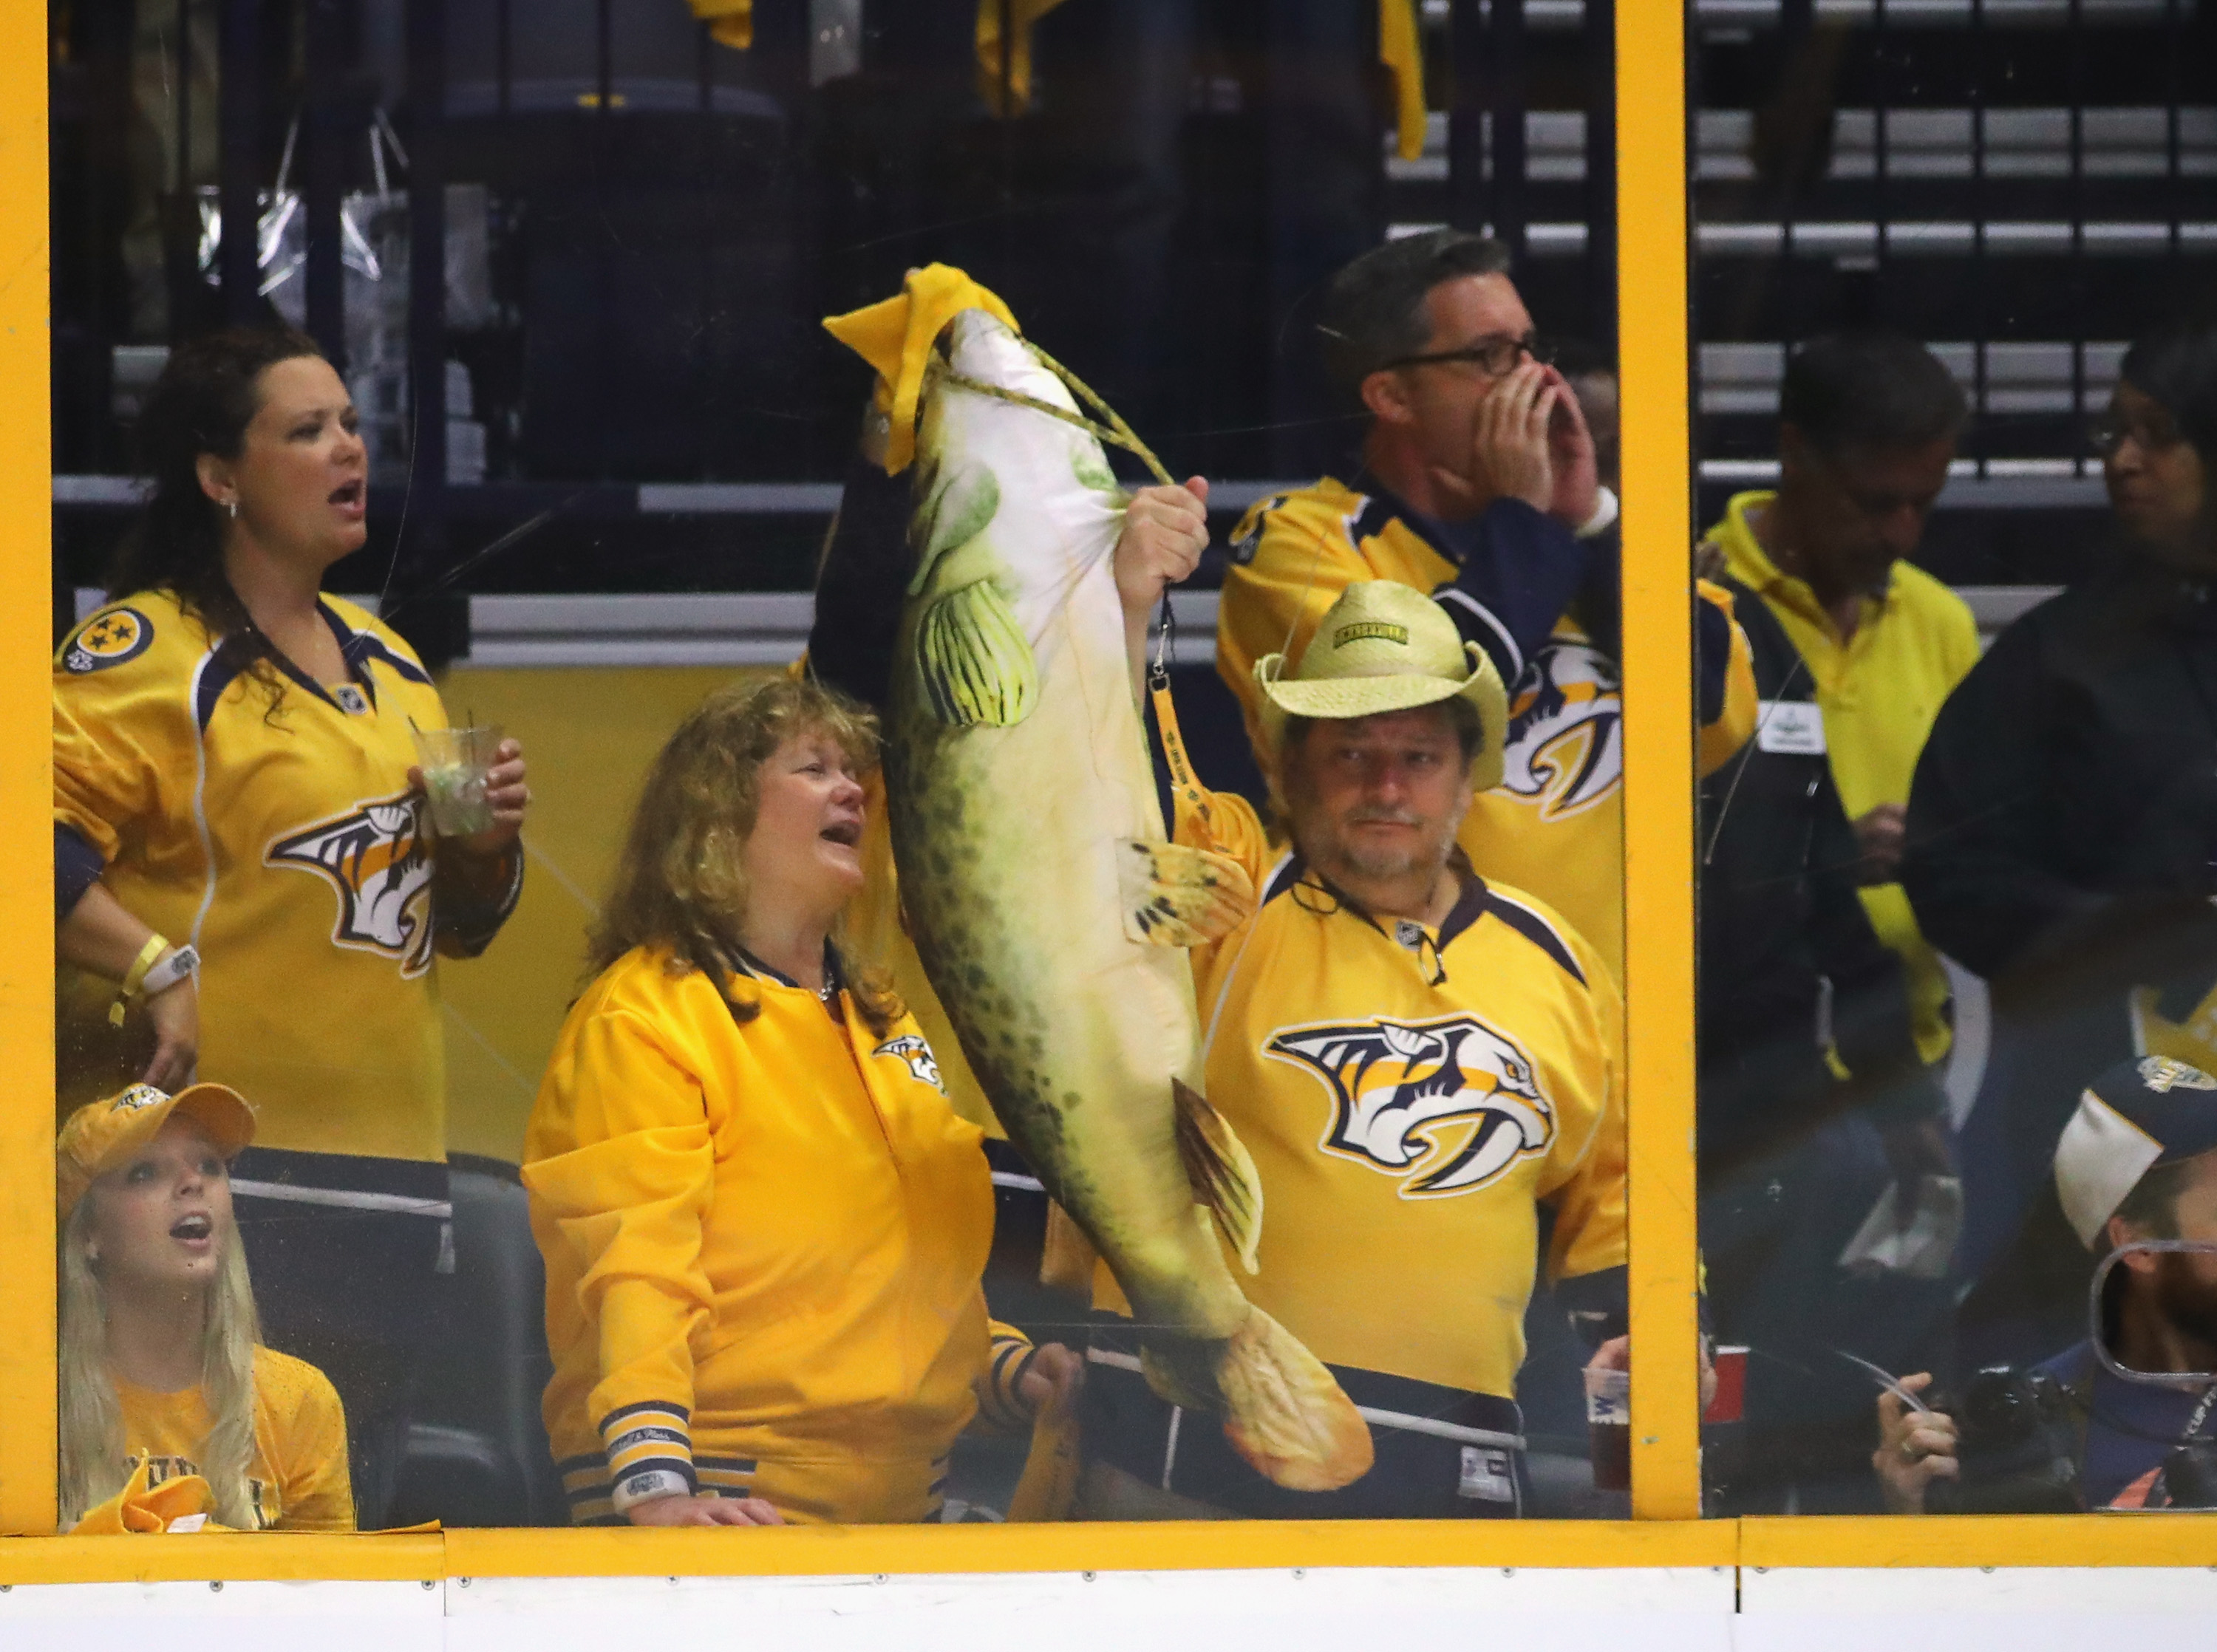 Catfish clad with gold party hat and Preds cape thrown on the ice : r/hockey